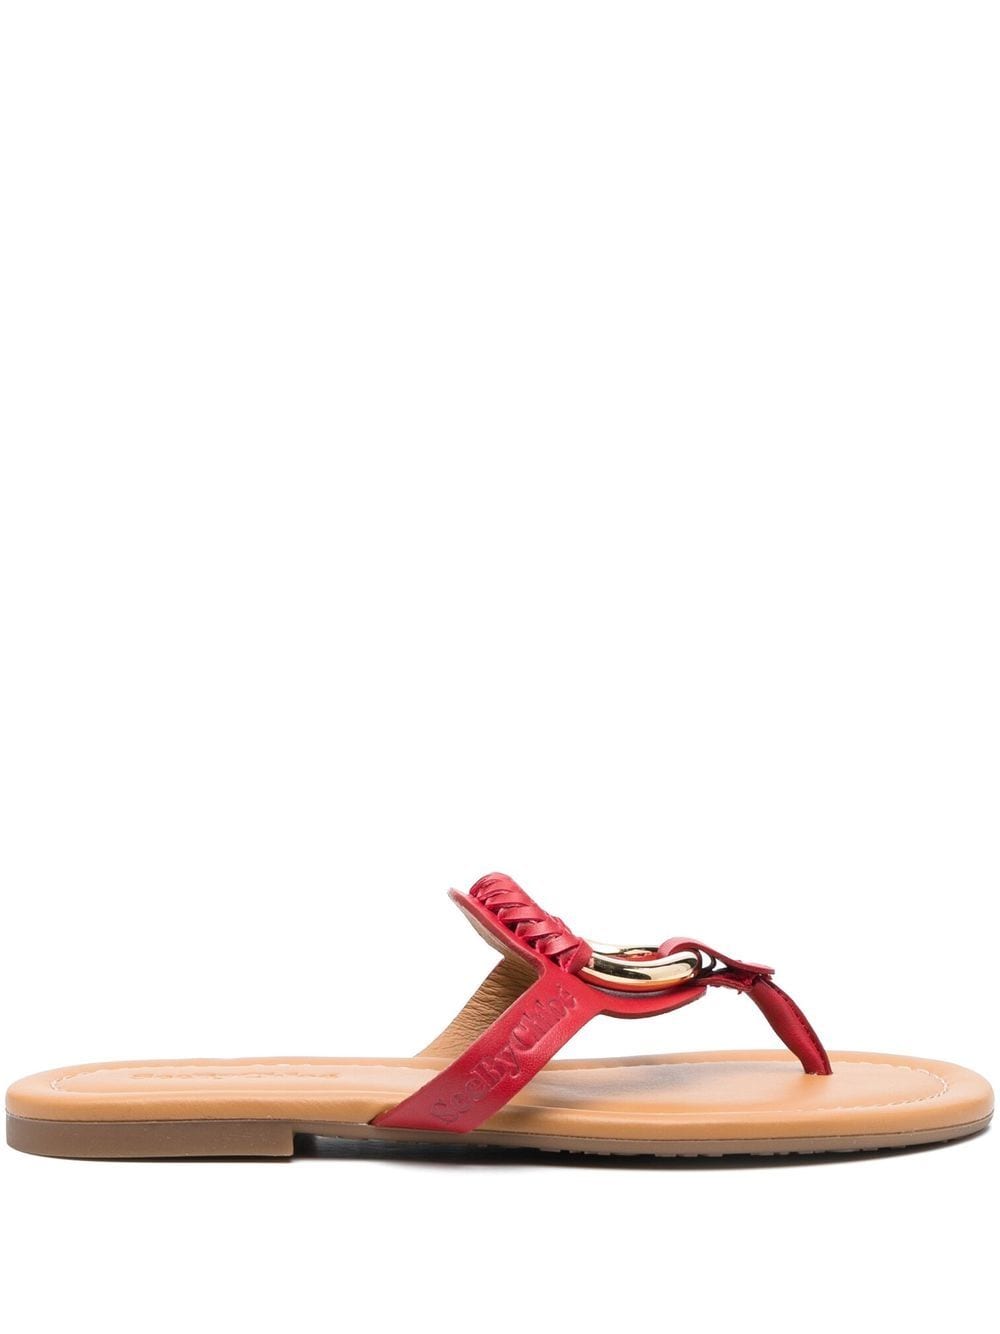 See By Chloé Leather Thong Sandals In Red